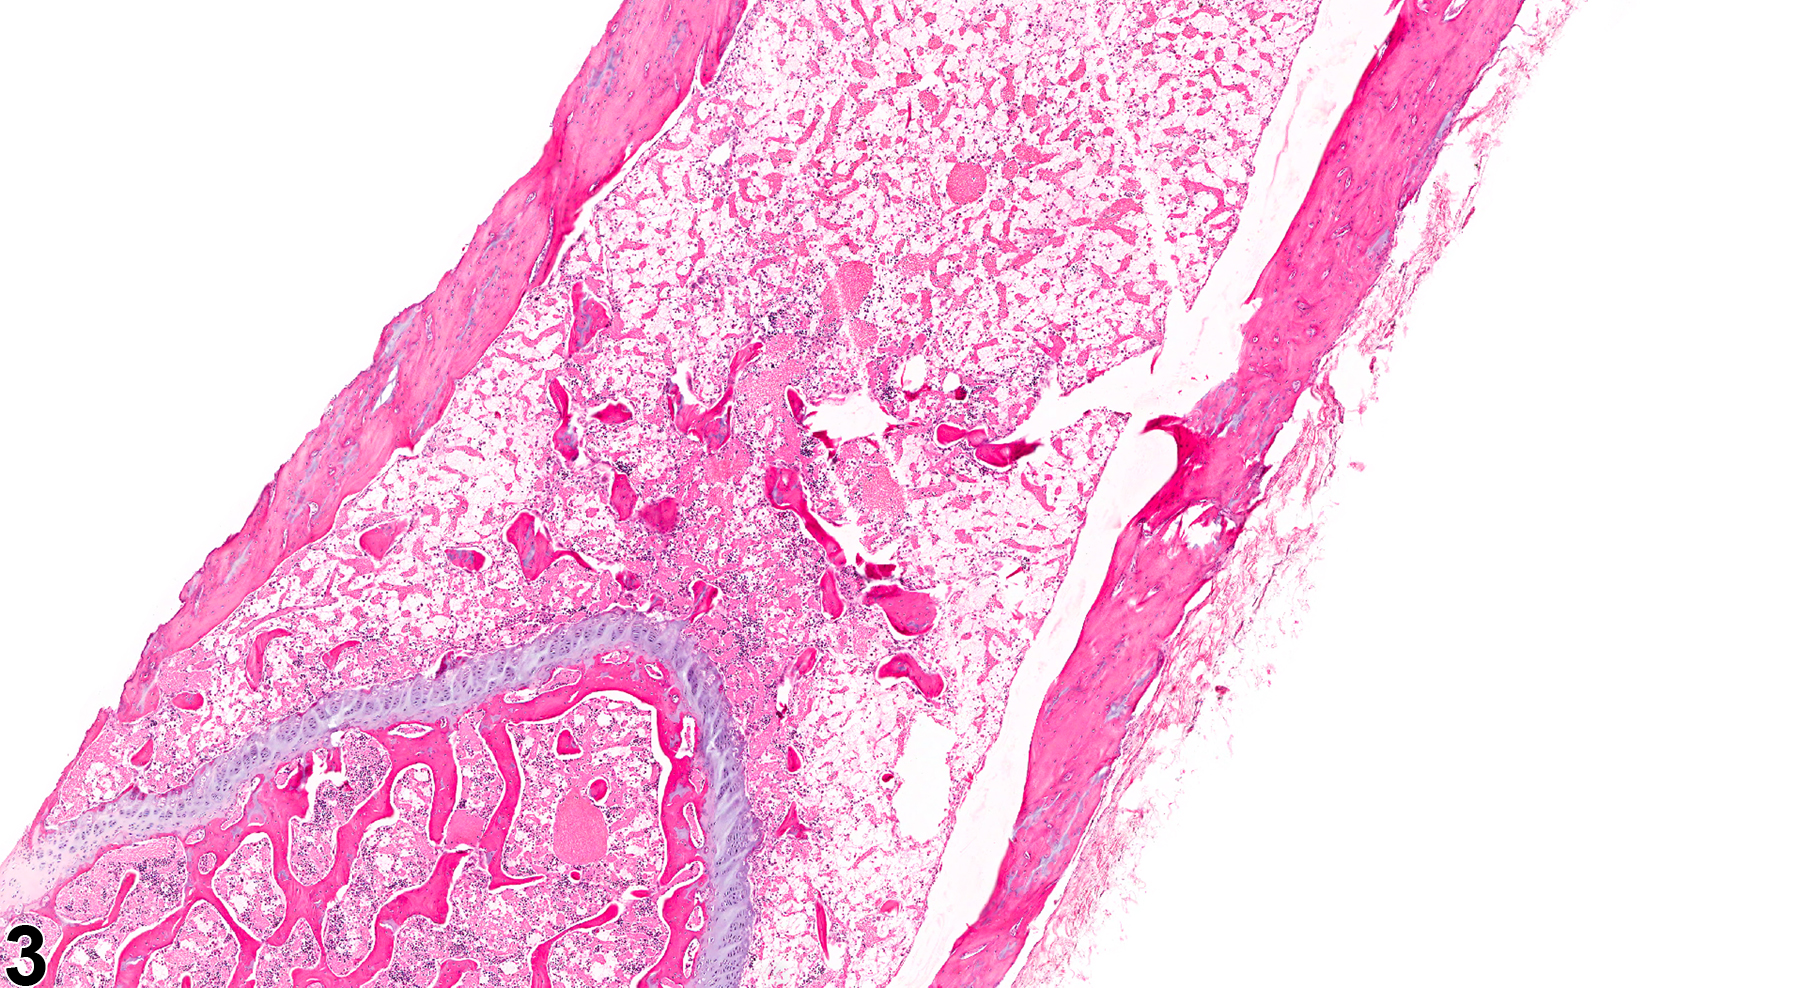 Image of decreased bone in the bone from a female F344/N rat in a chronic study